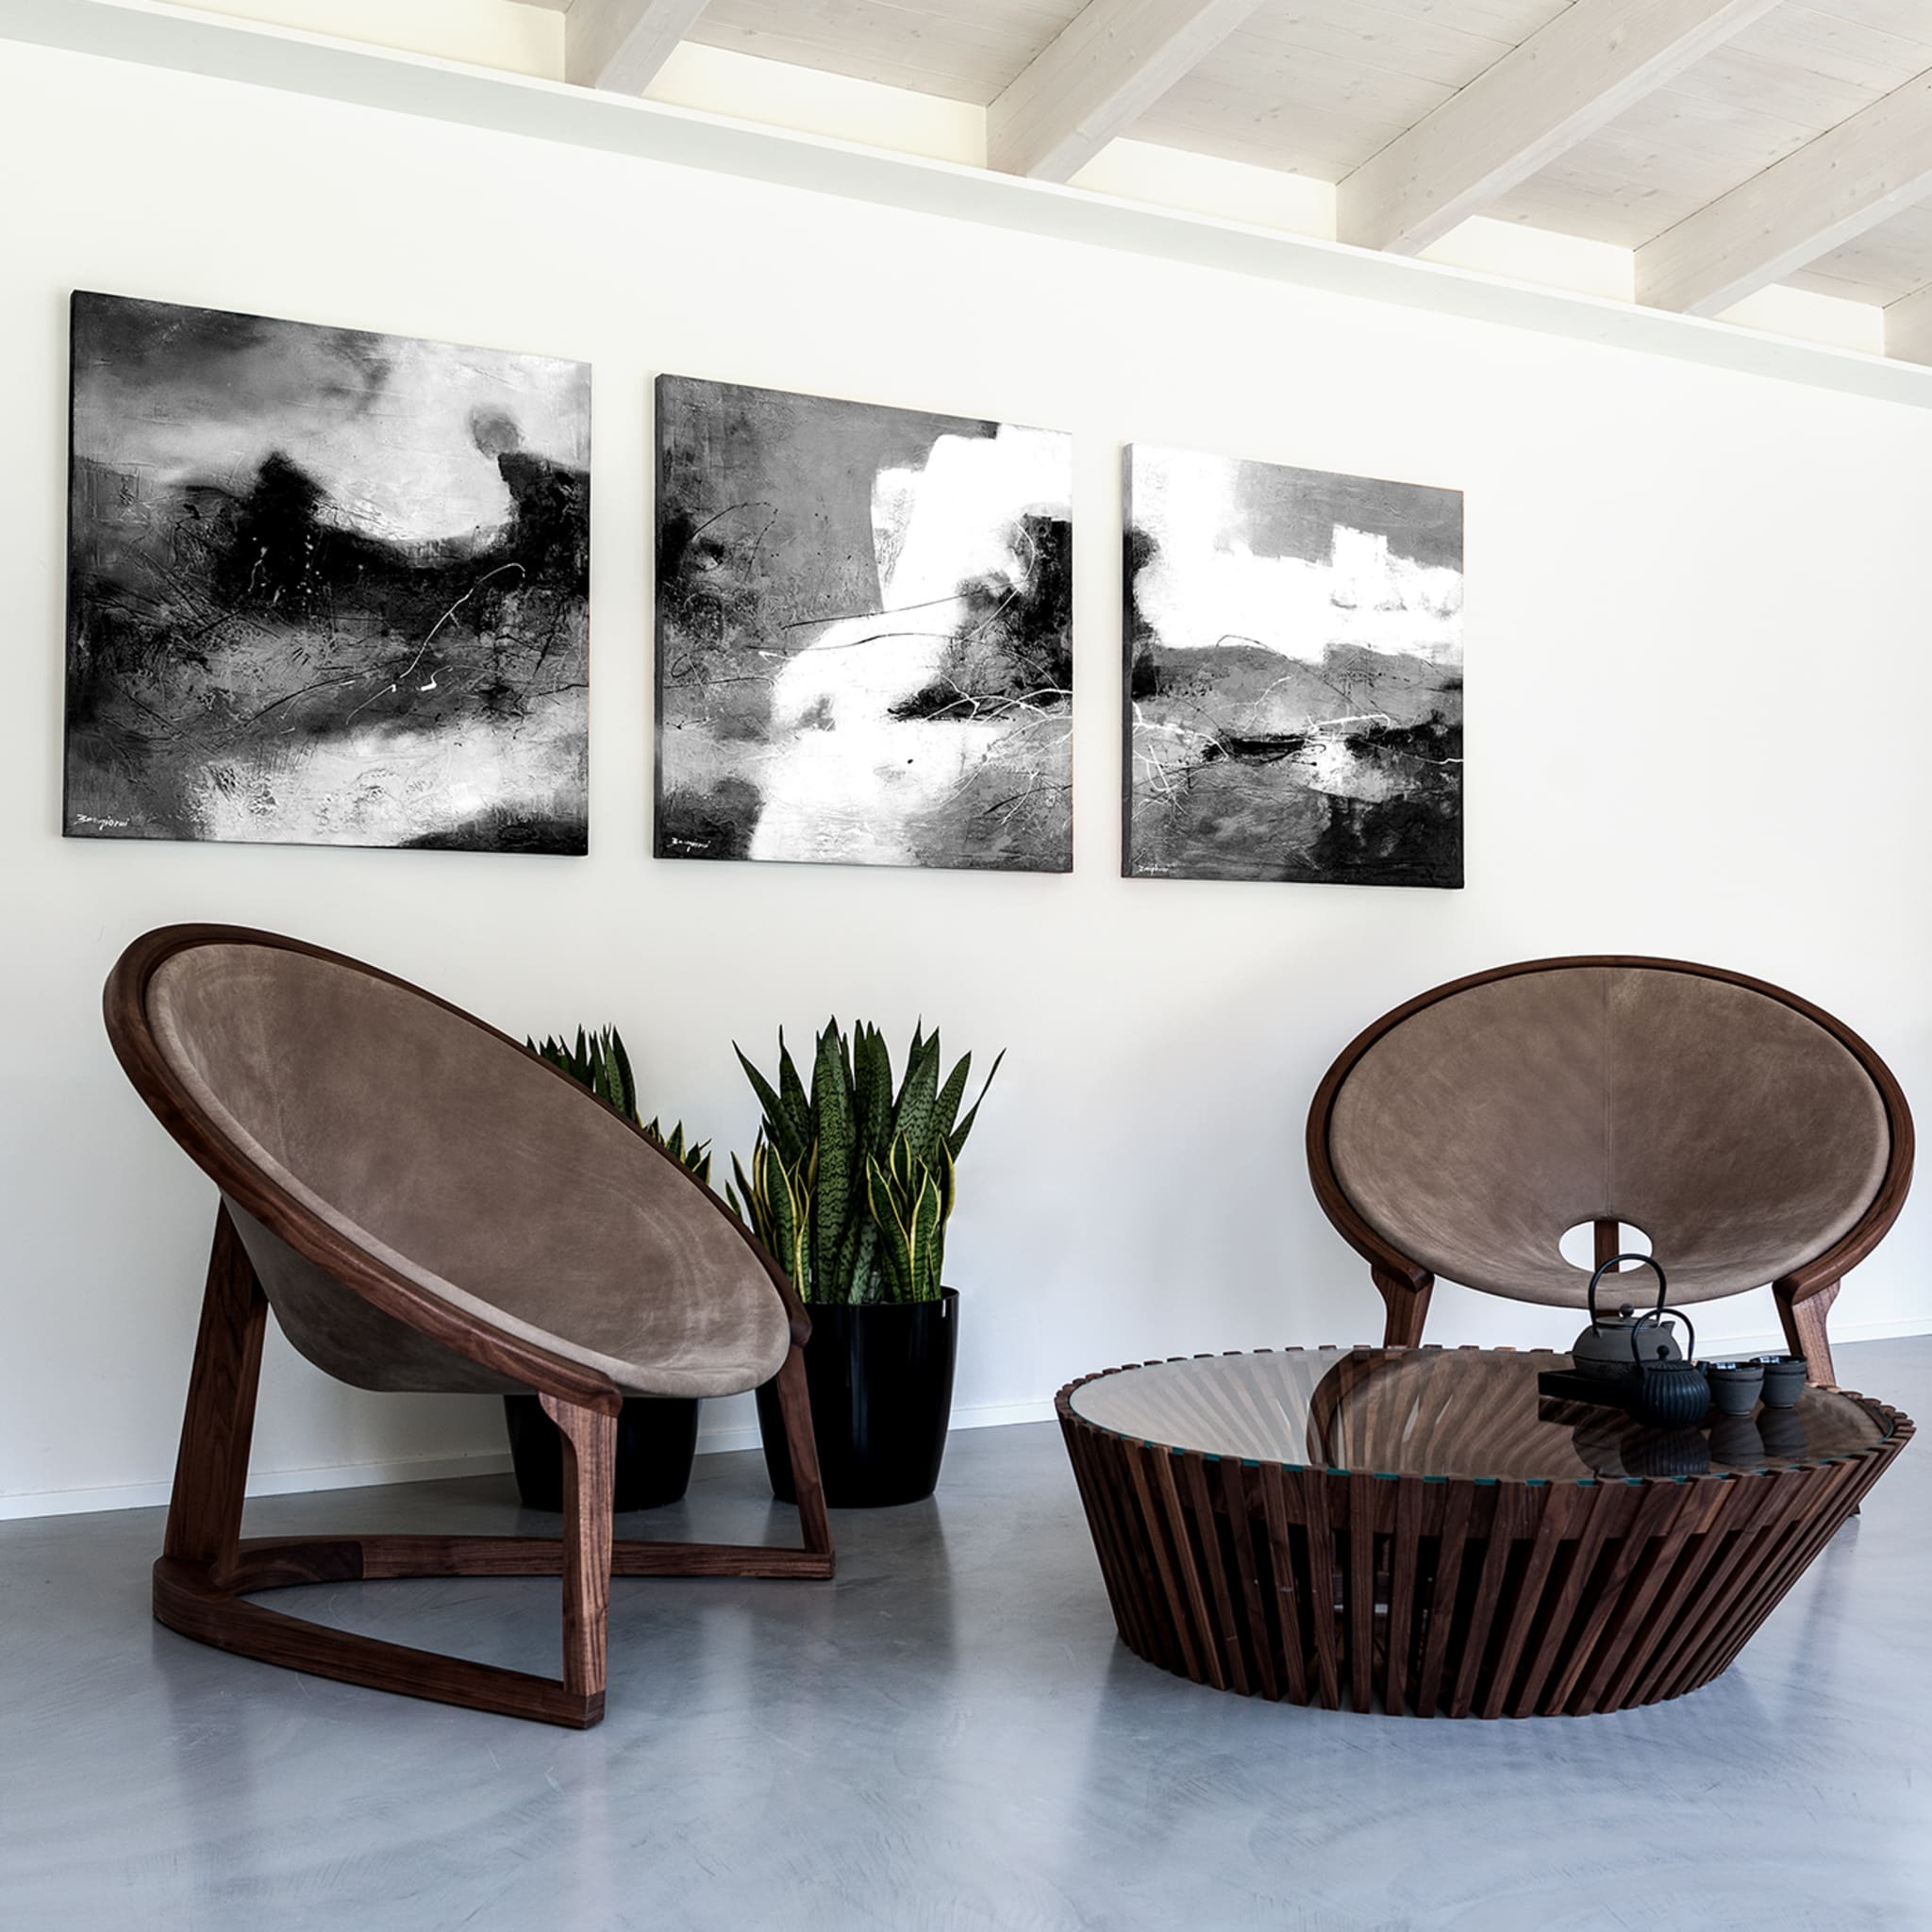 Ying & Yang Lounge Chair by Steve Leung - Alternative view 2